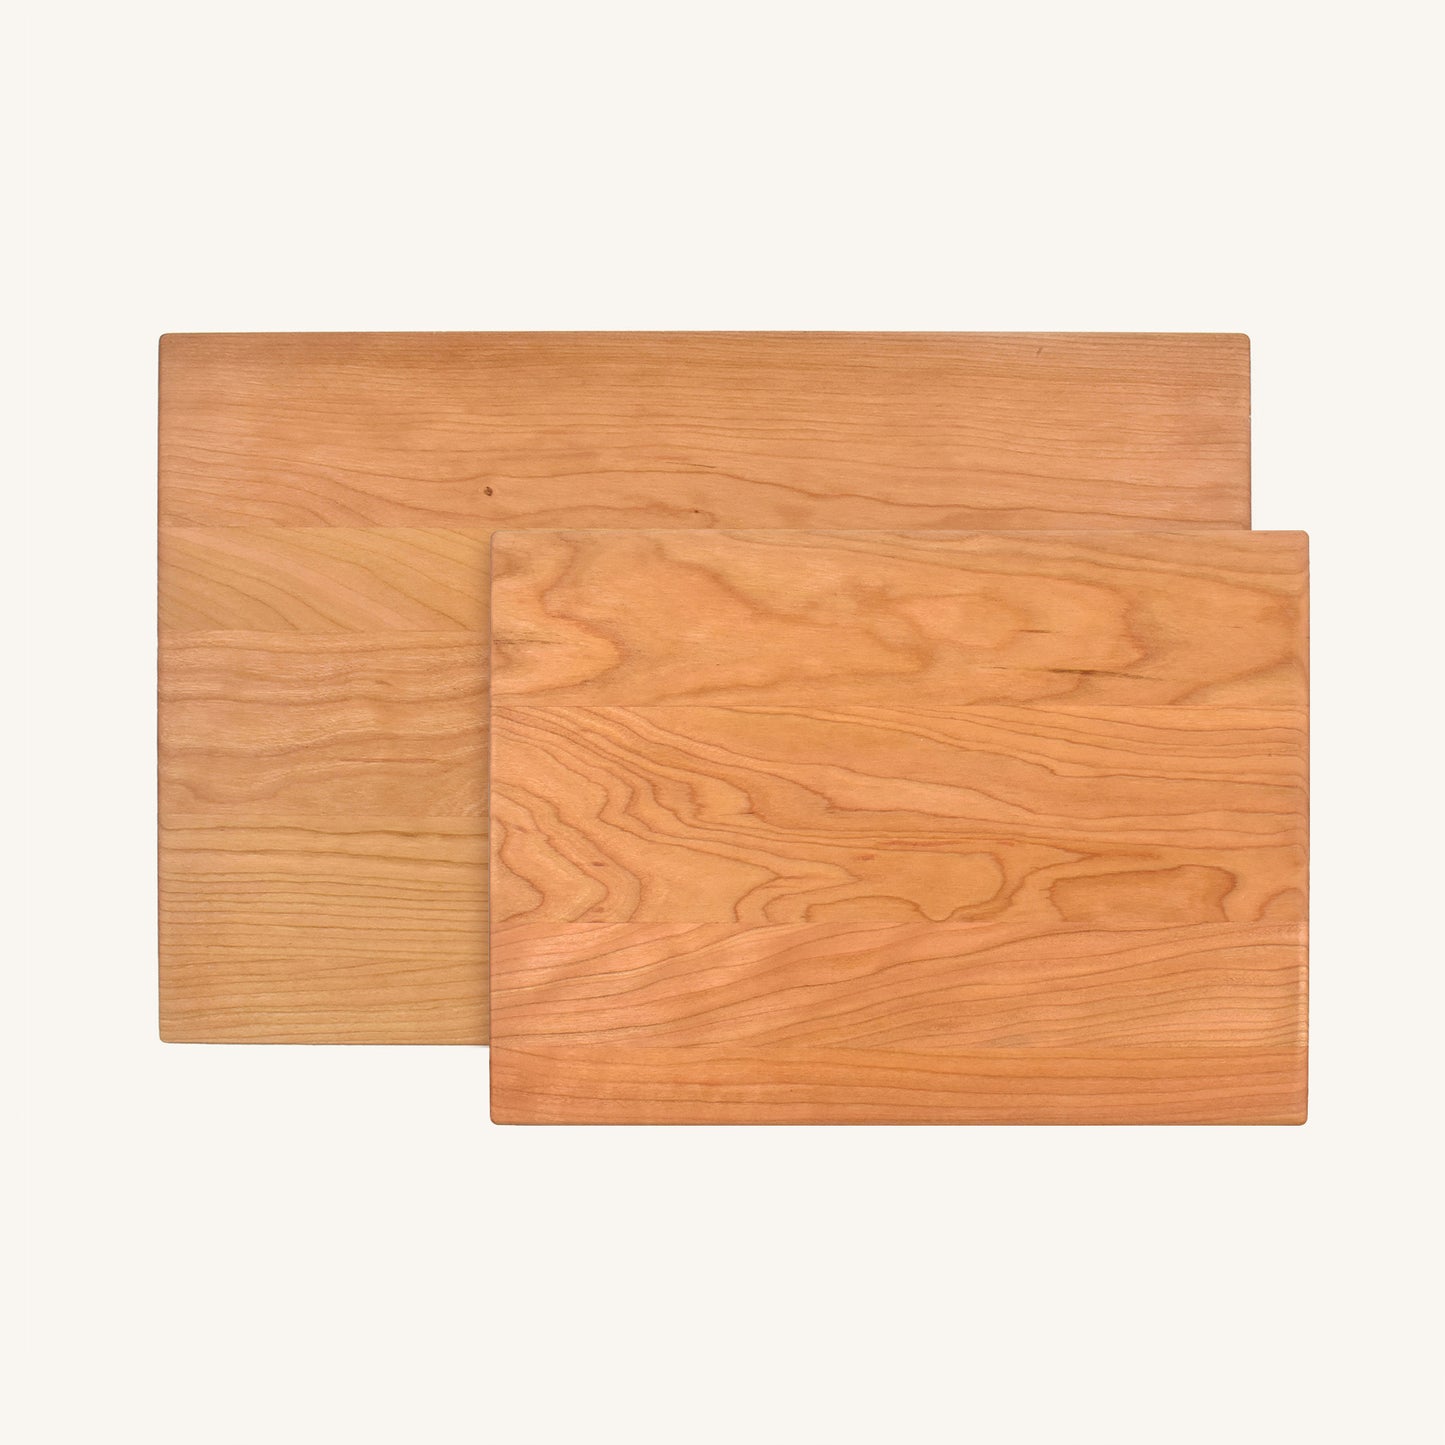 Bundle of Medium and Large Wood Cutting Board with Rounded Corner and Edges